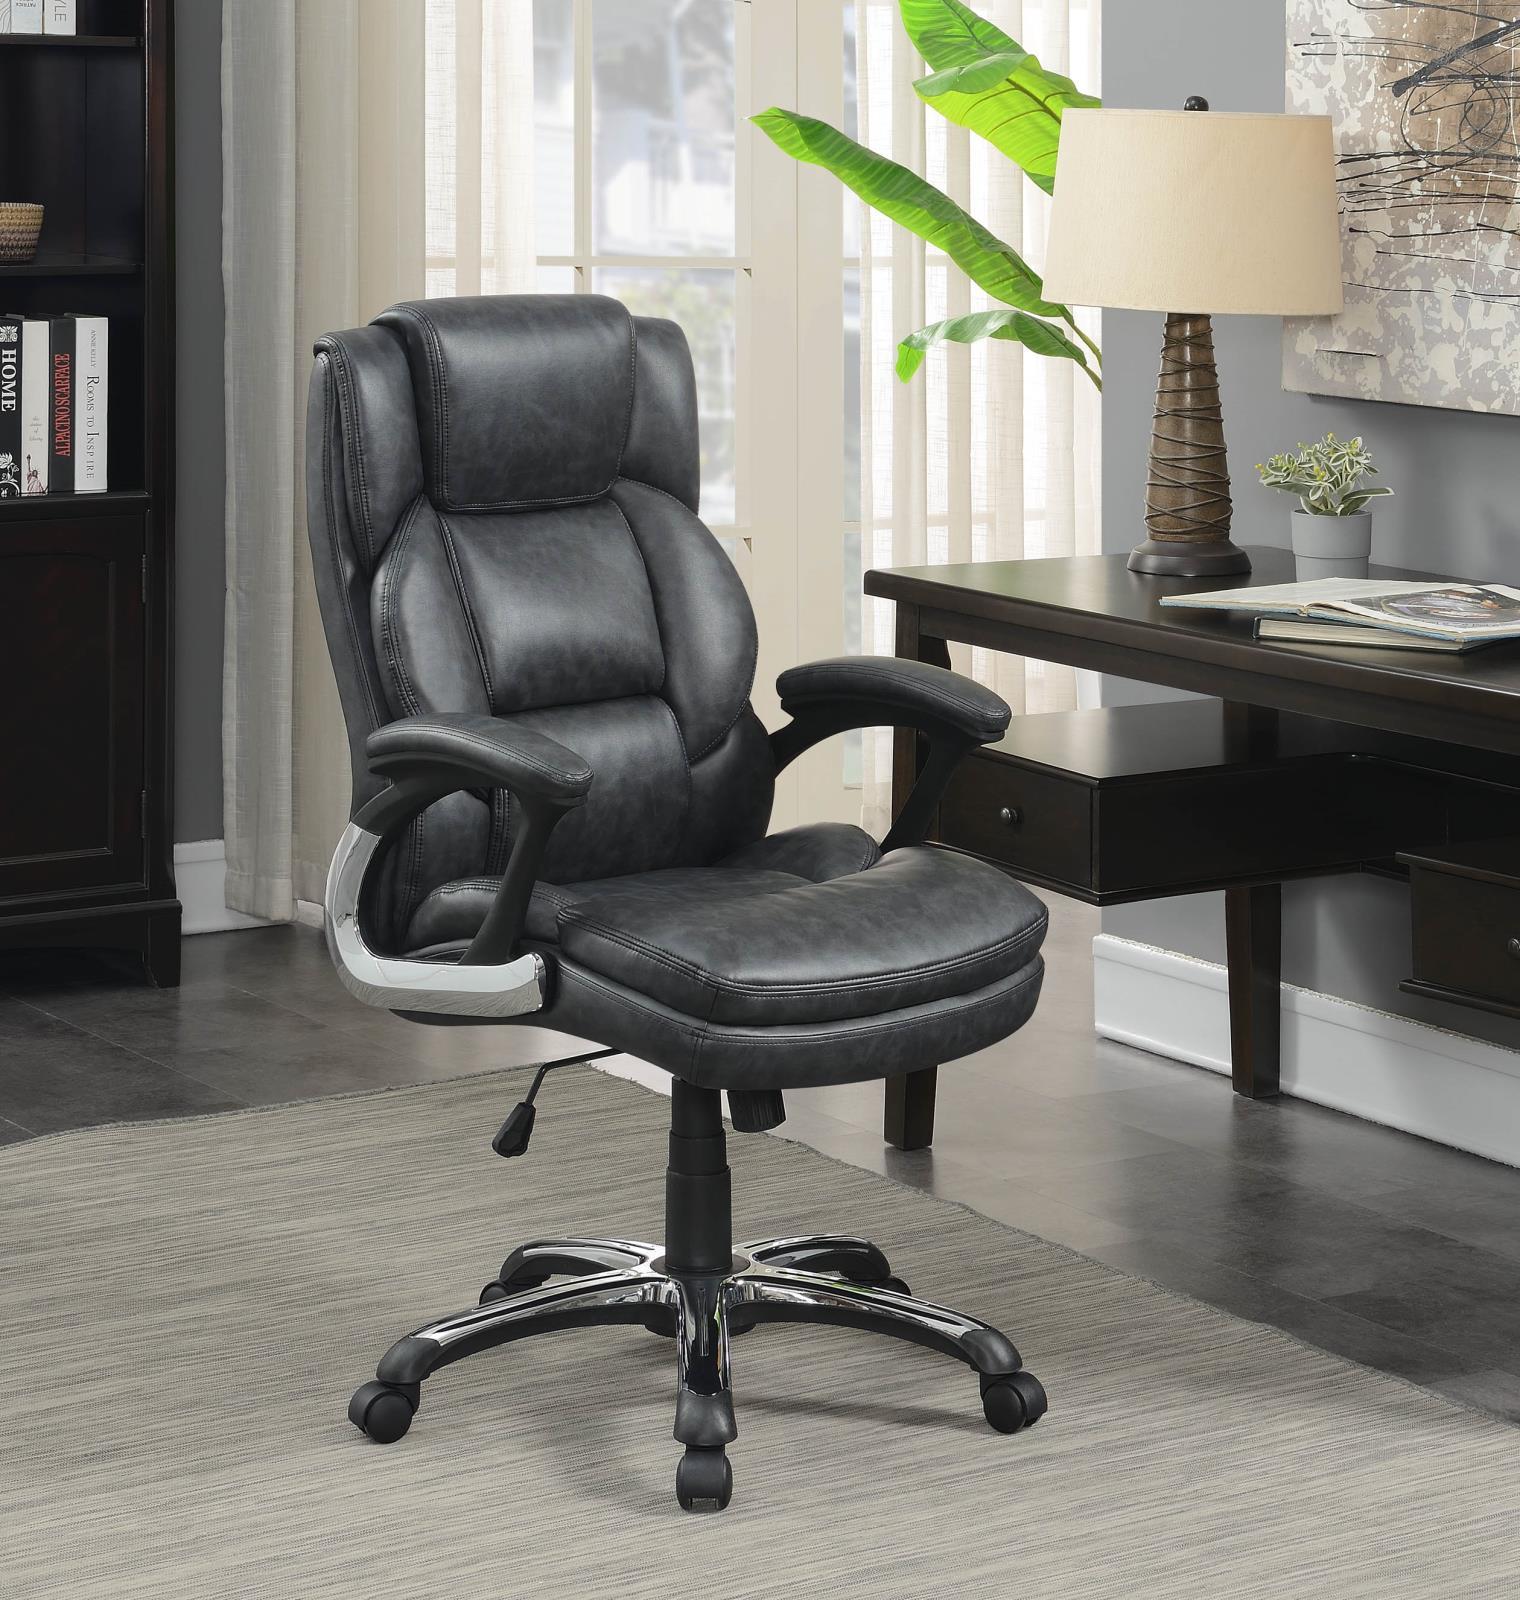 Nerris Adjustable Height Office Chair with Padded Arm Grey and Black - Luxury Home Furniture (MI)